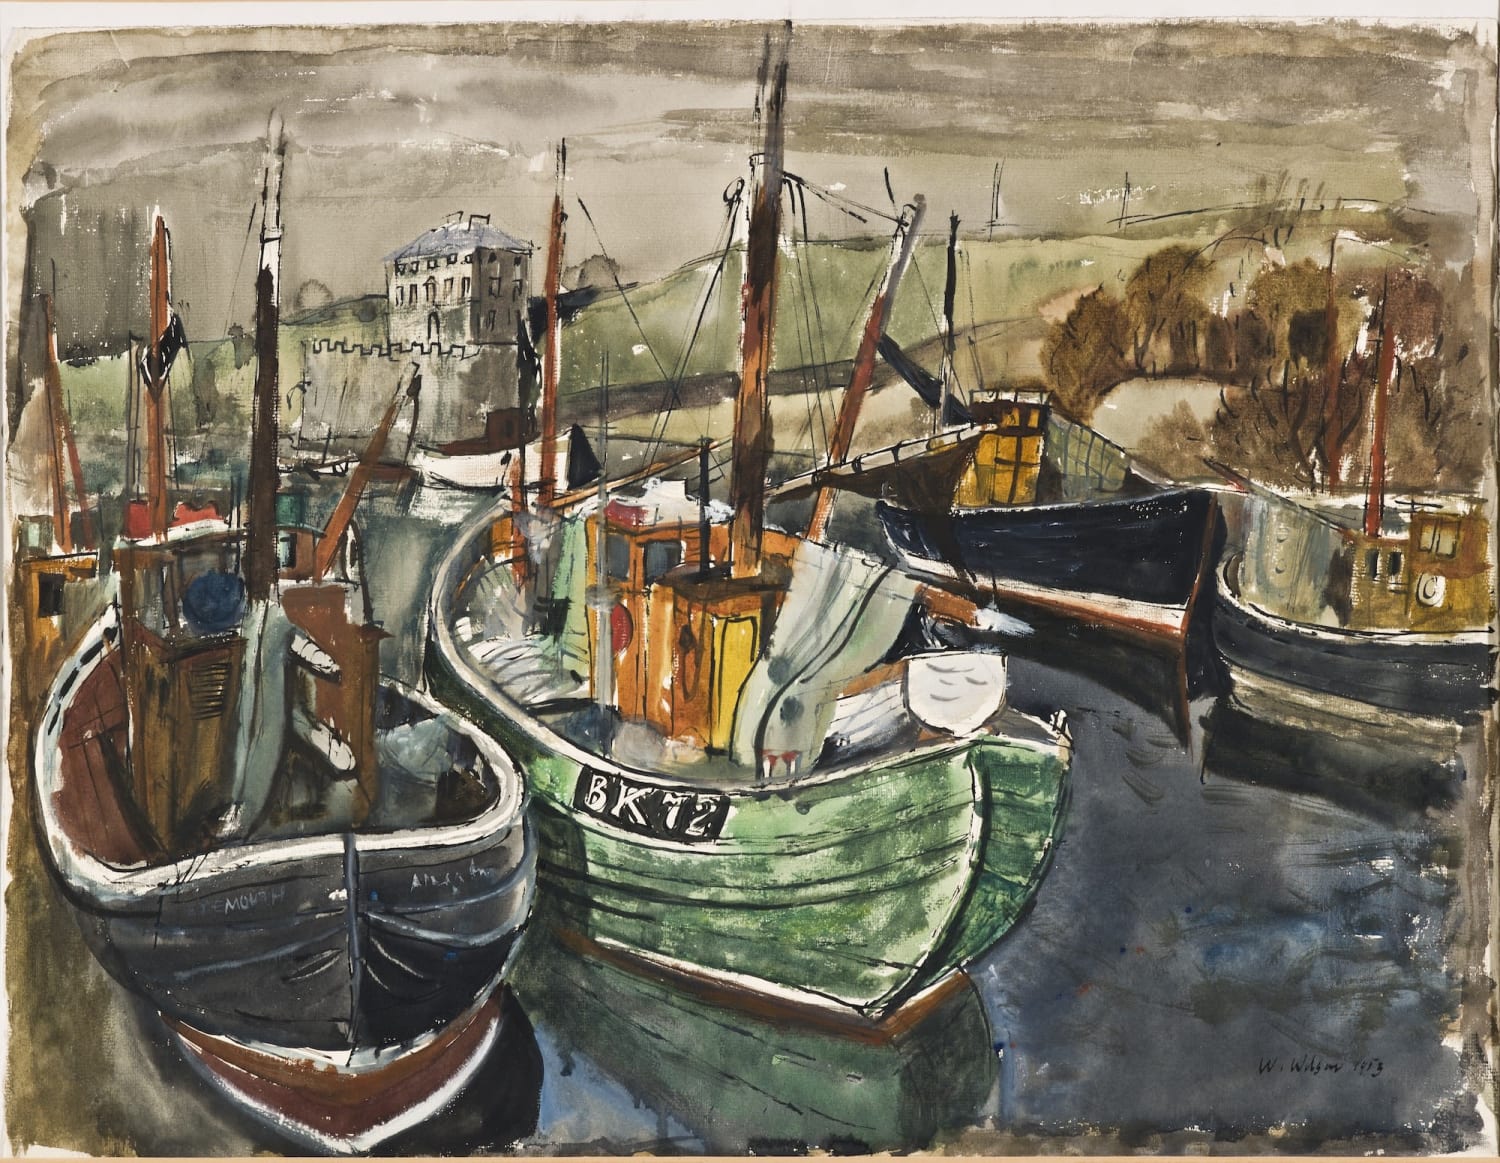 William Wilson RSA (1905-72), Boats, Eyemouth  ink and watercolour on paper, 1953, 48.0 x 63.0cm  RSA Diploma Collection (Deposited, 1971) 1995.029